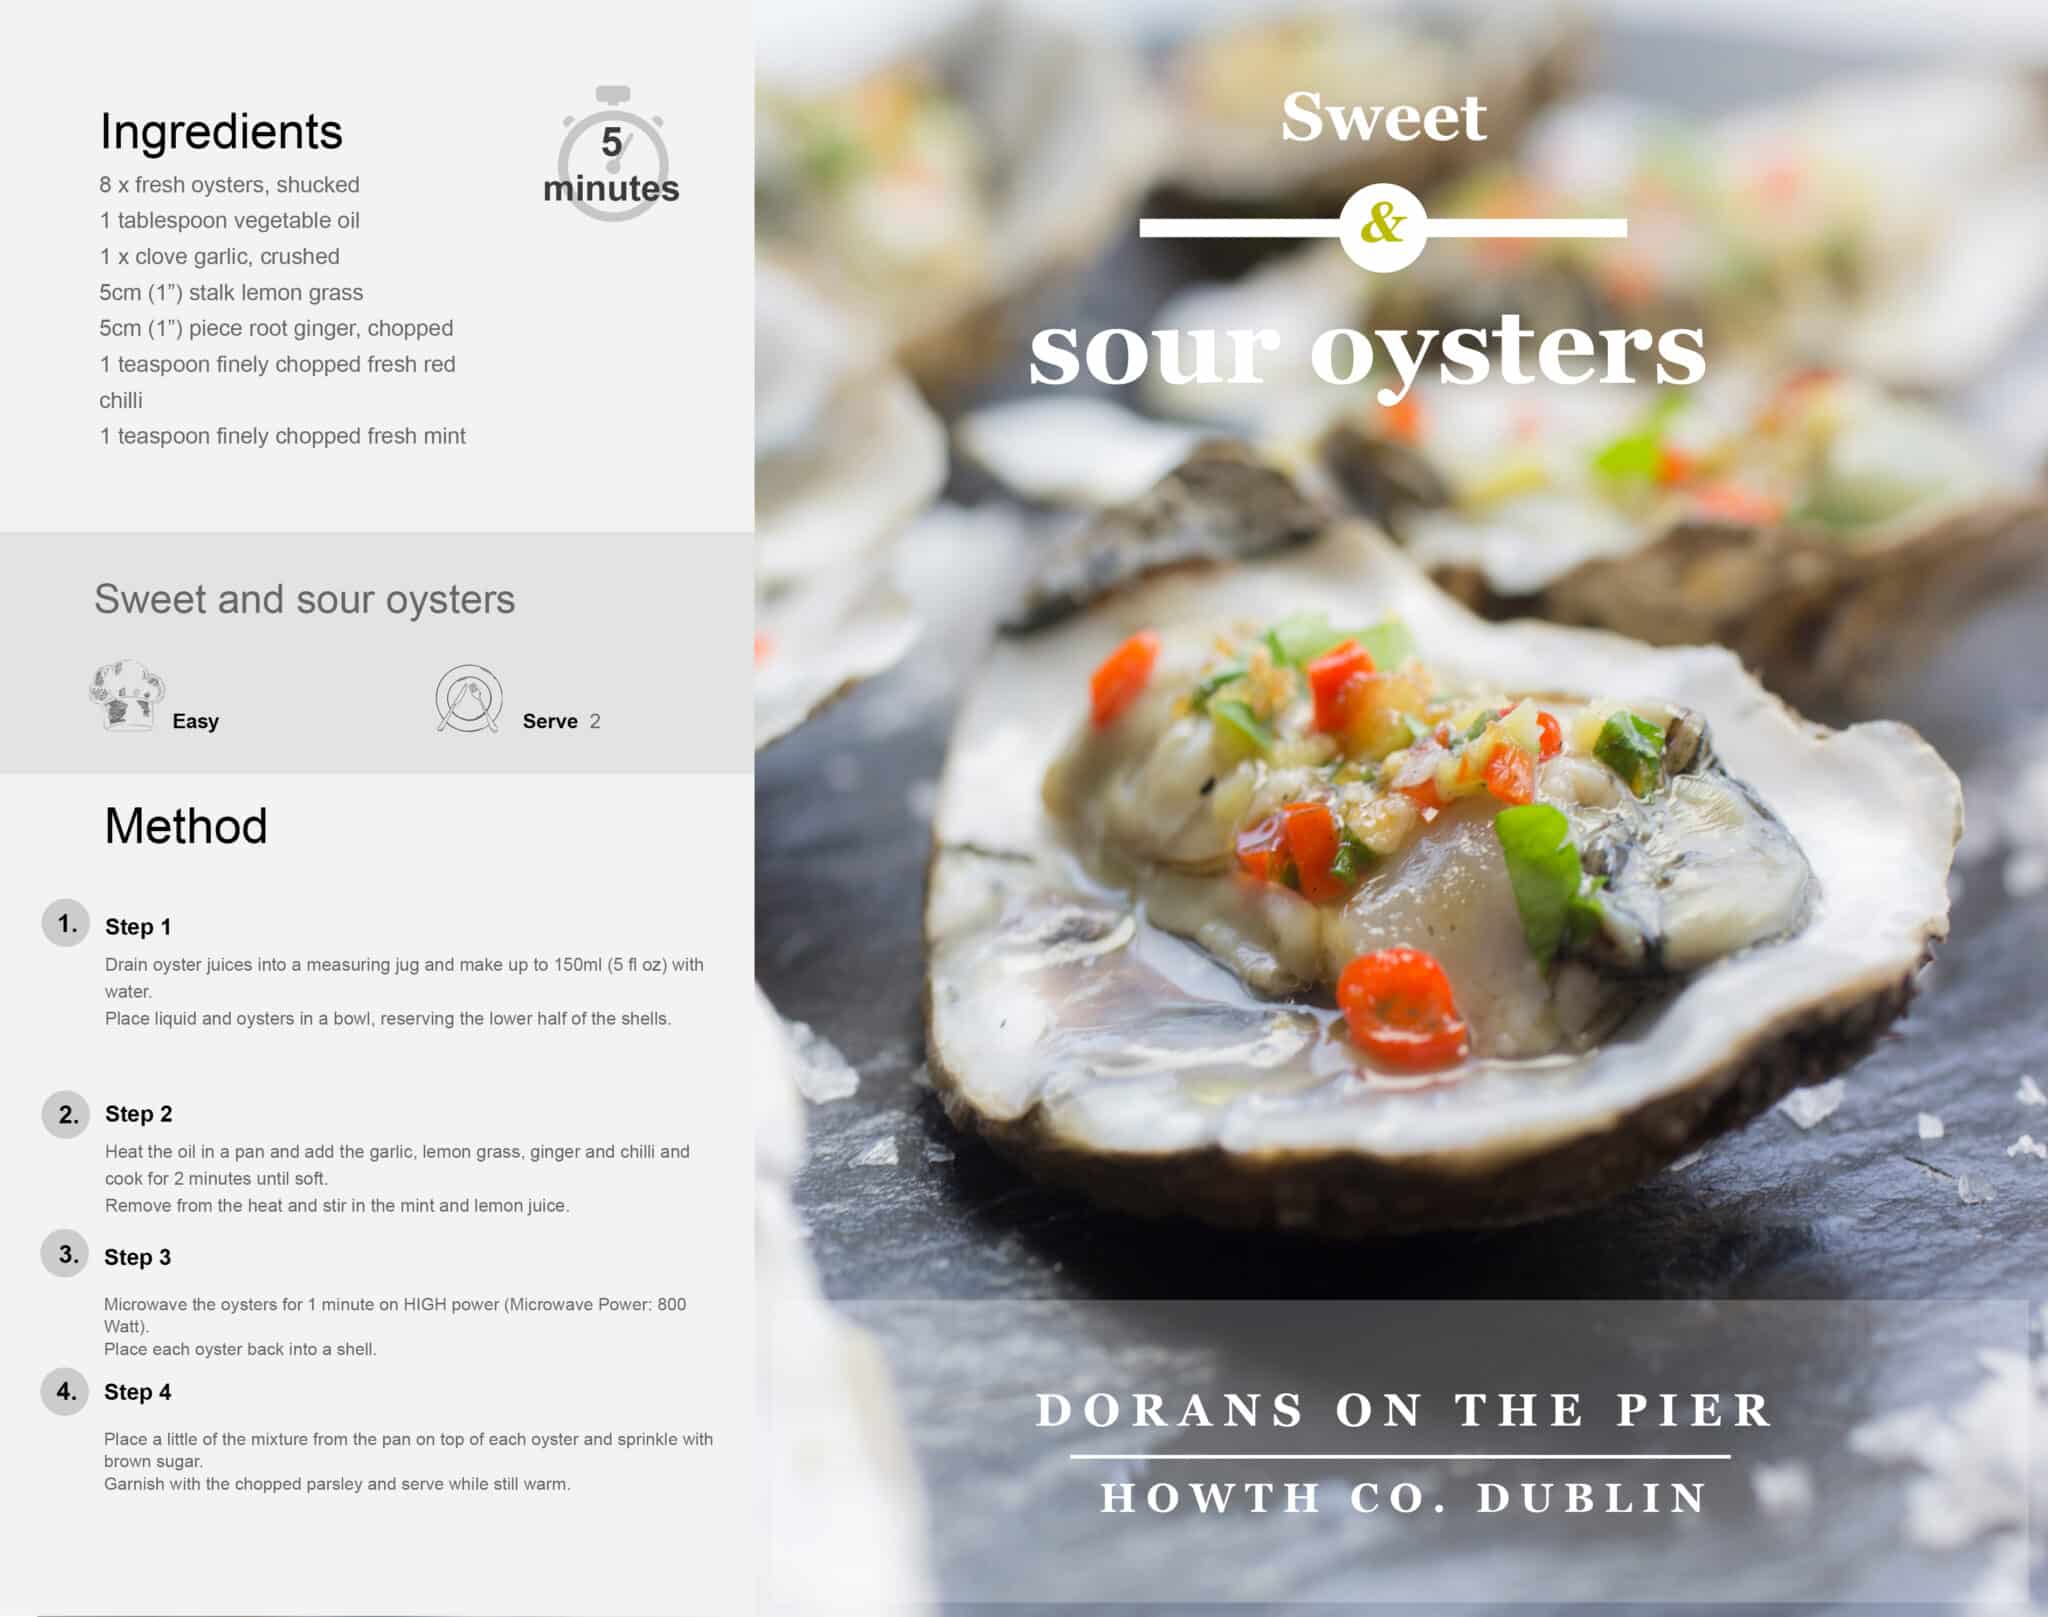 Sweet & Sour Oysters